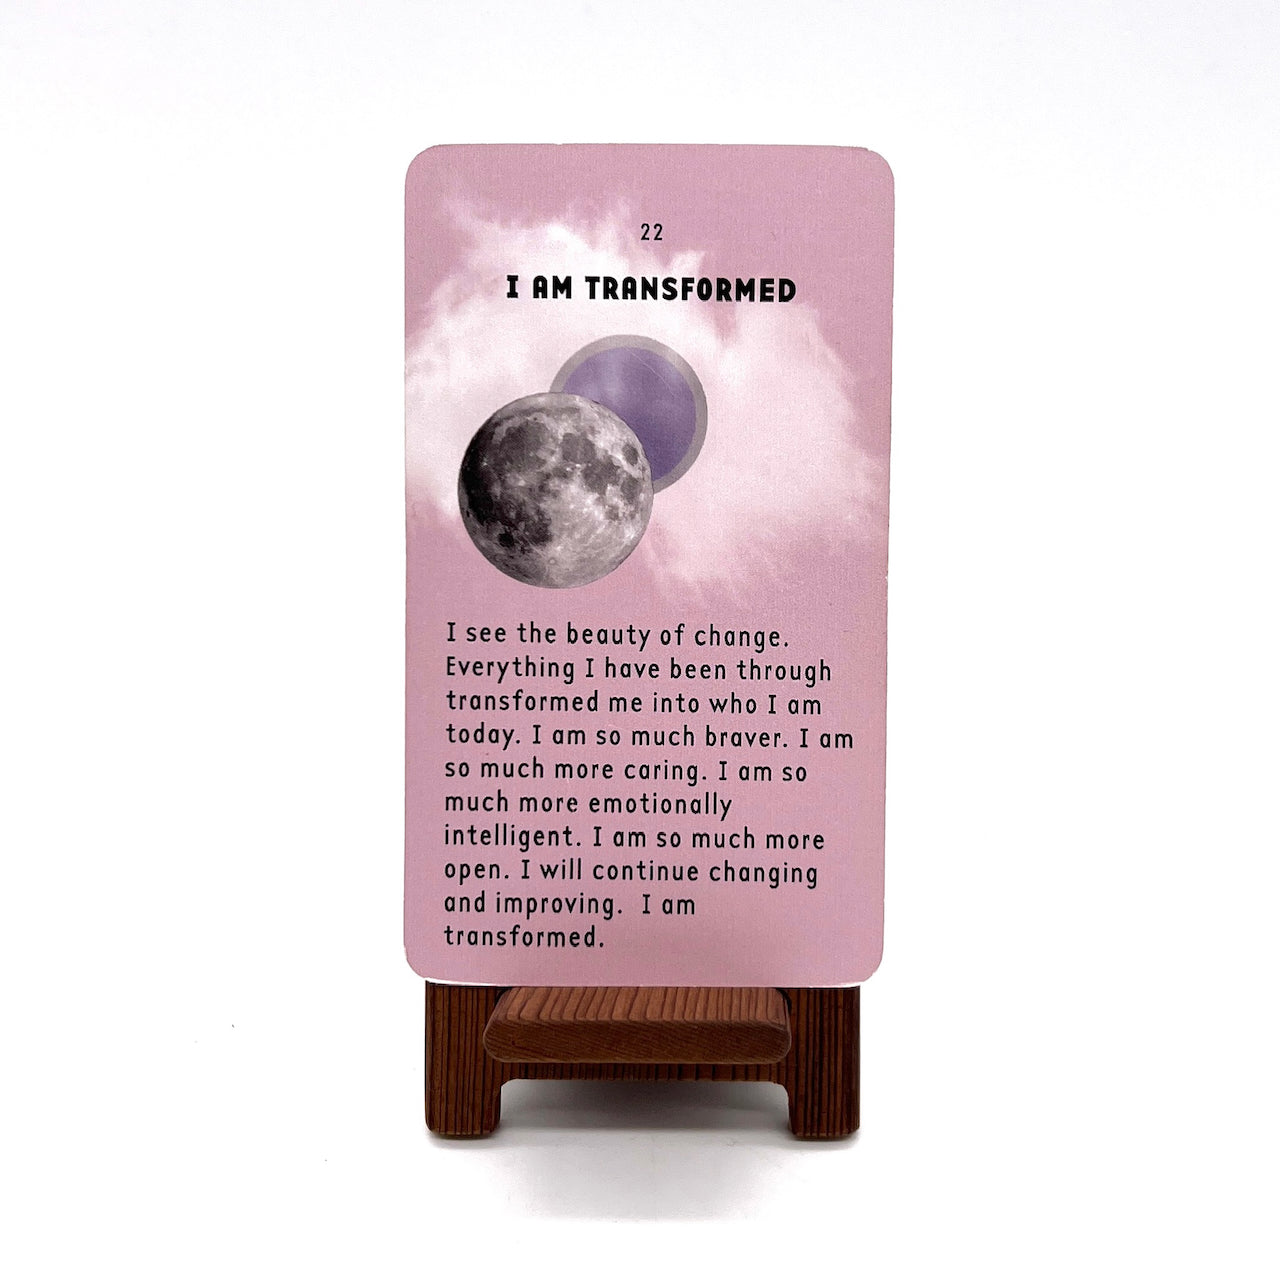 I am Transformed card from I am Everything affirmation deck.